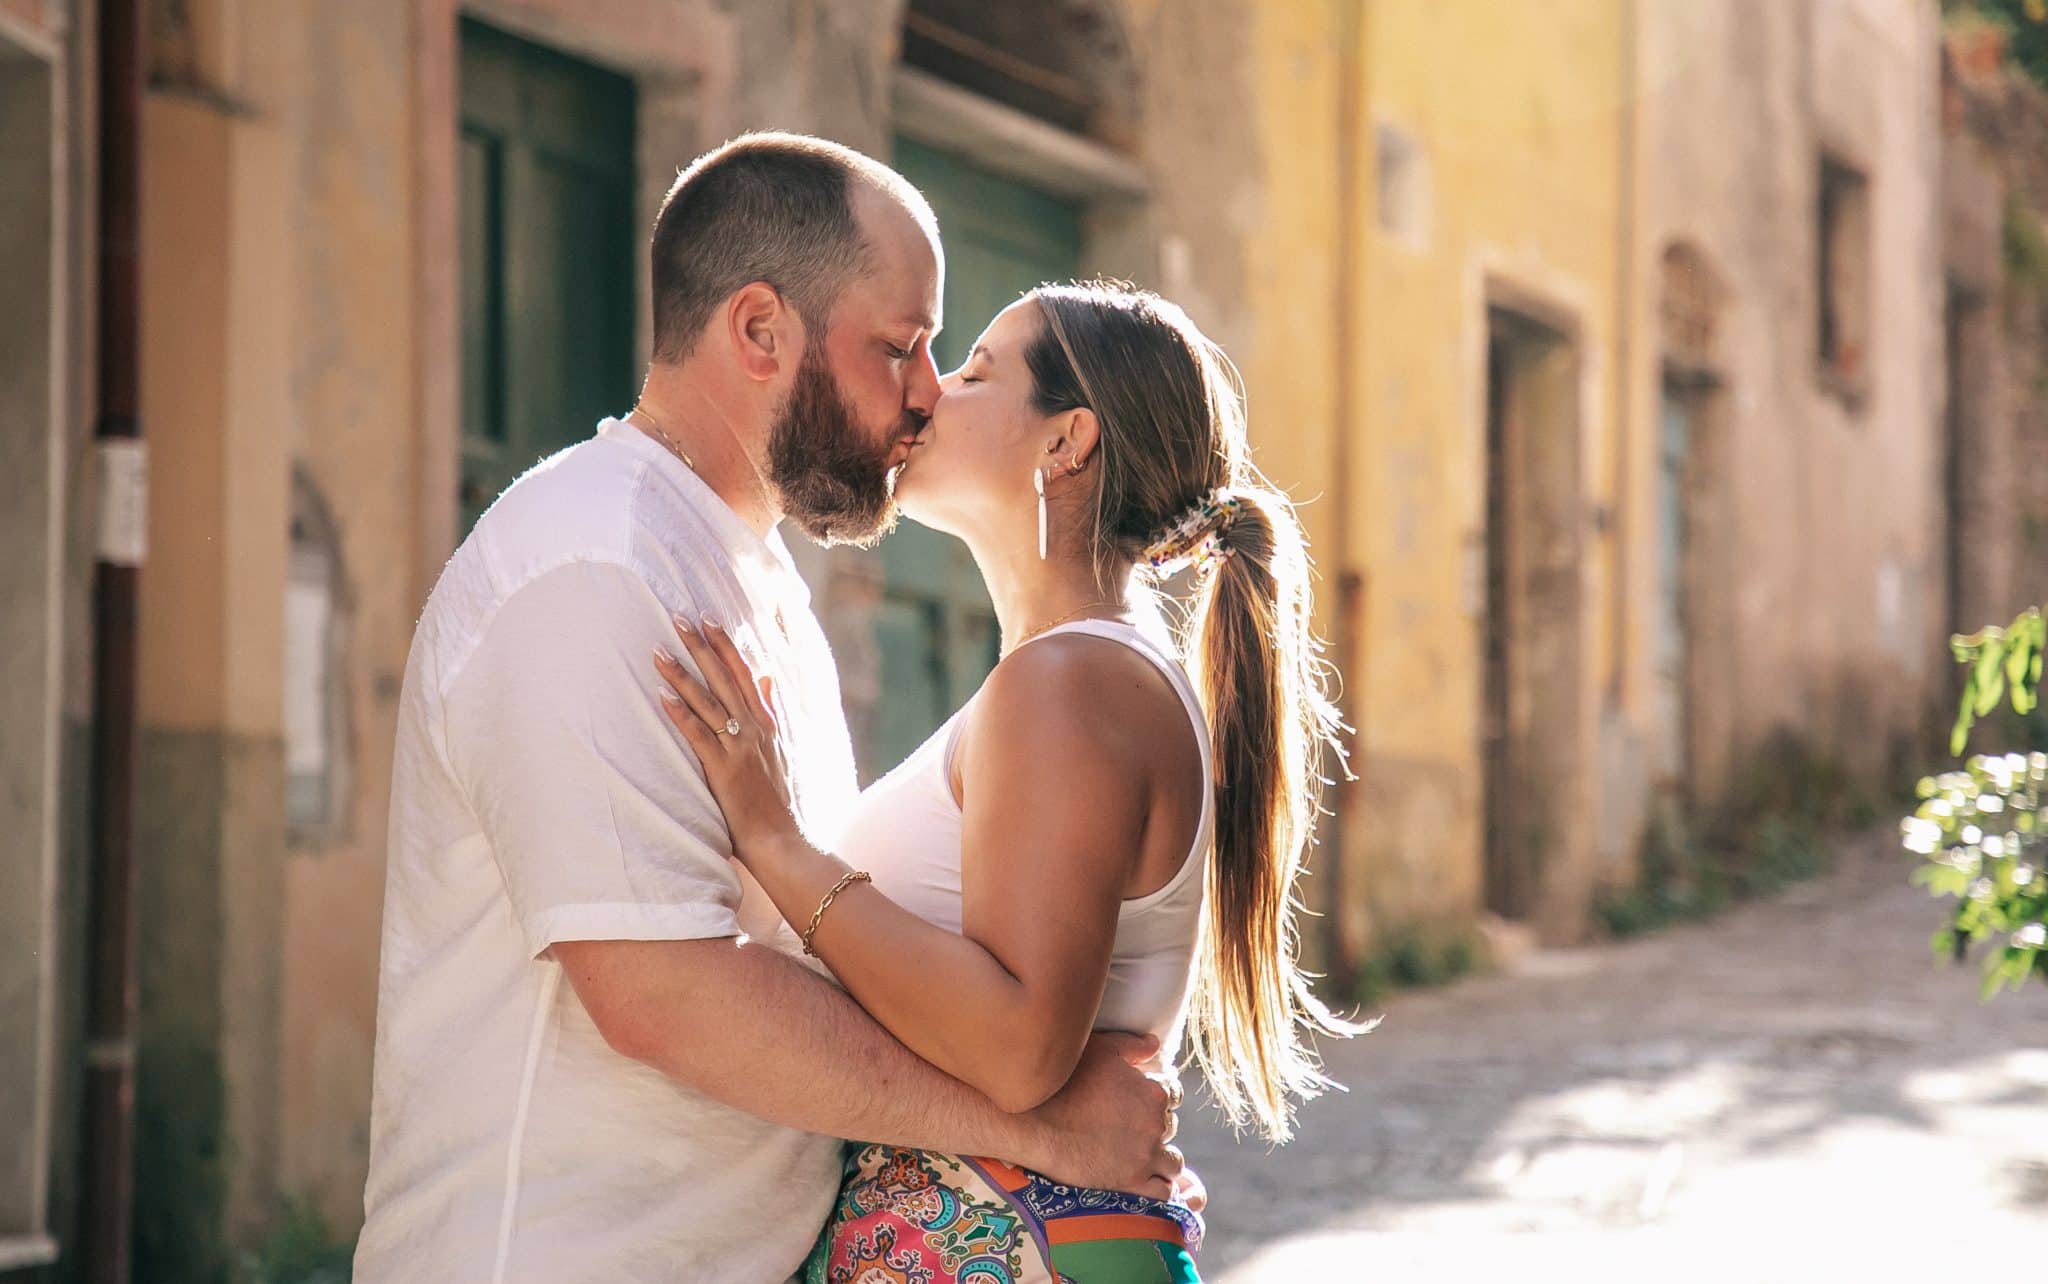 Newly engaged couple share a kiss on the streets of Italy